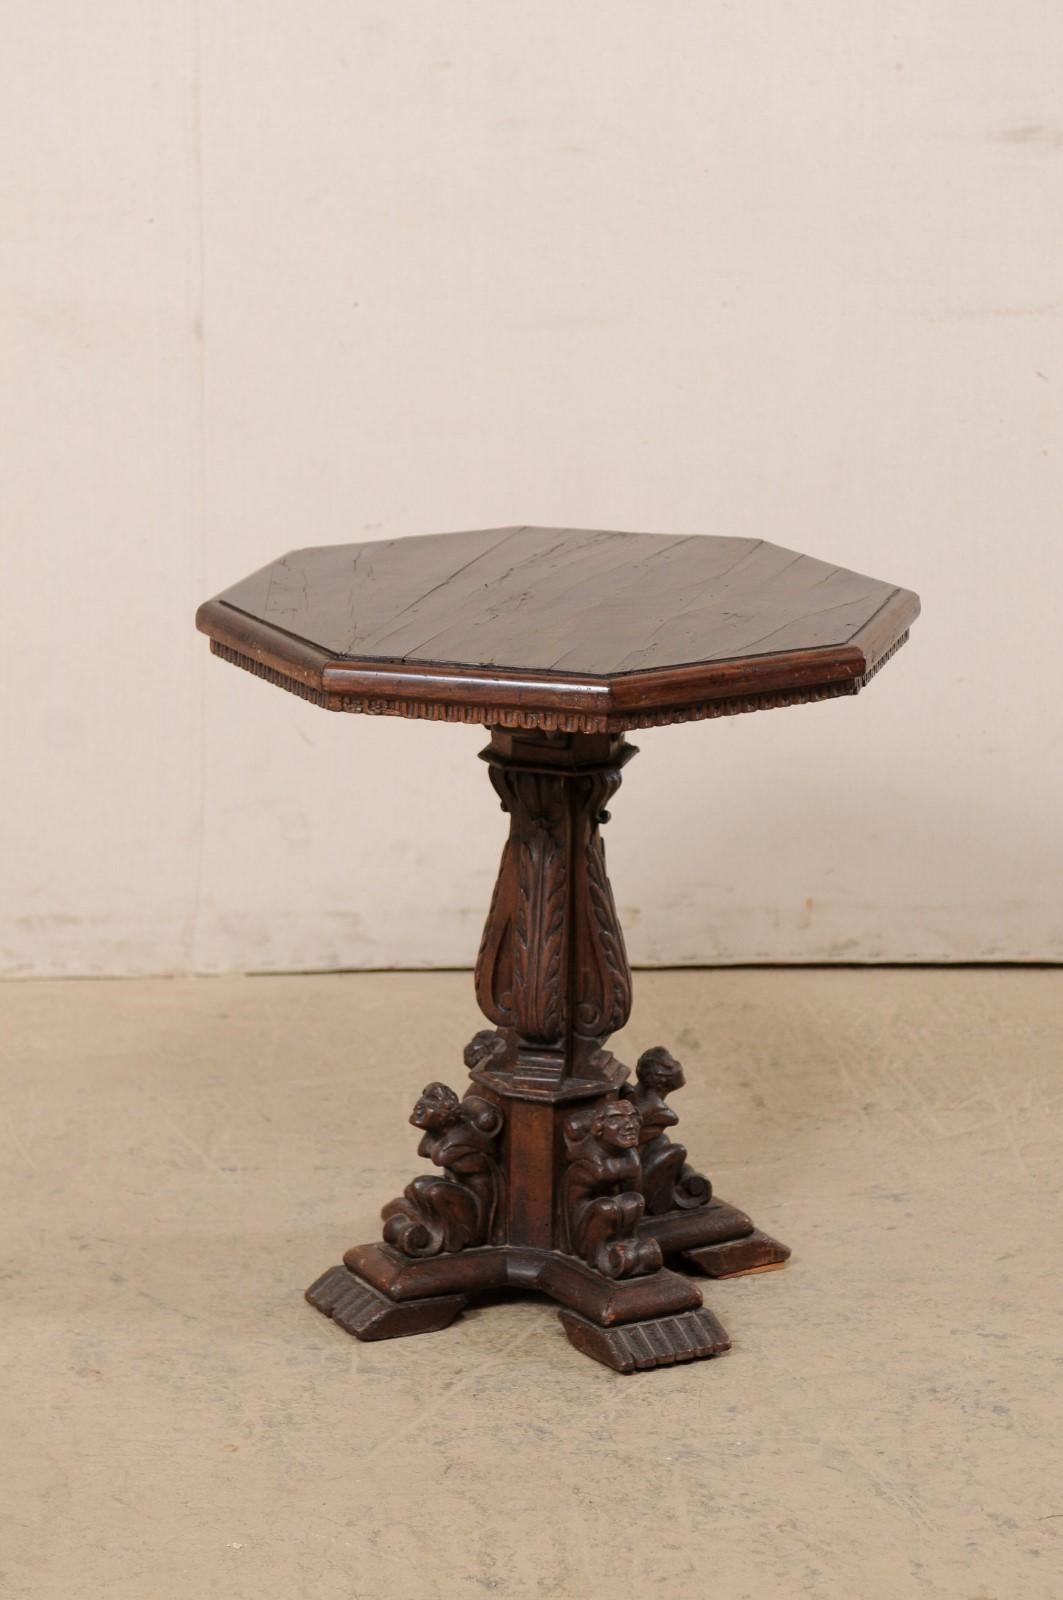 An Italian wooden occasional table, with highly carved acanthus and figural motif pedestal base, from the early 19th century. This antique table from Italy features an octagonal-shaped top which rests above an elaborately decorated pedestal, wrapped